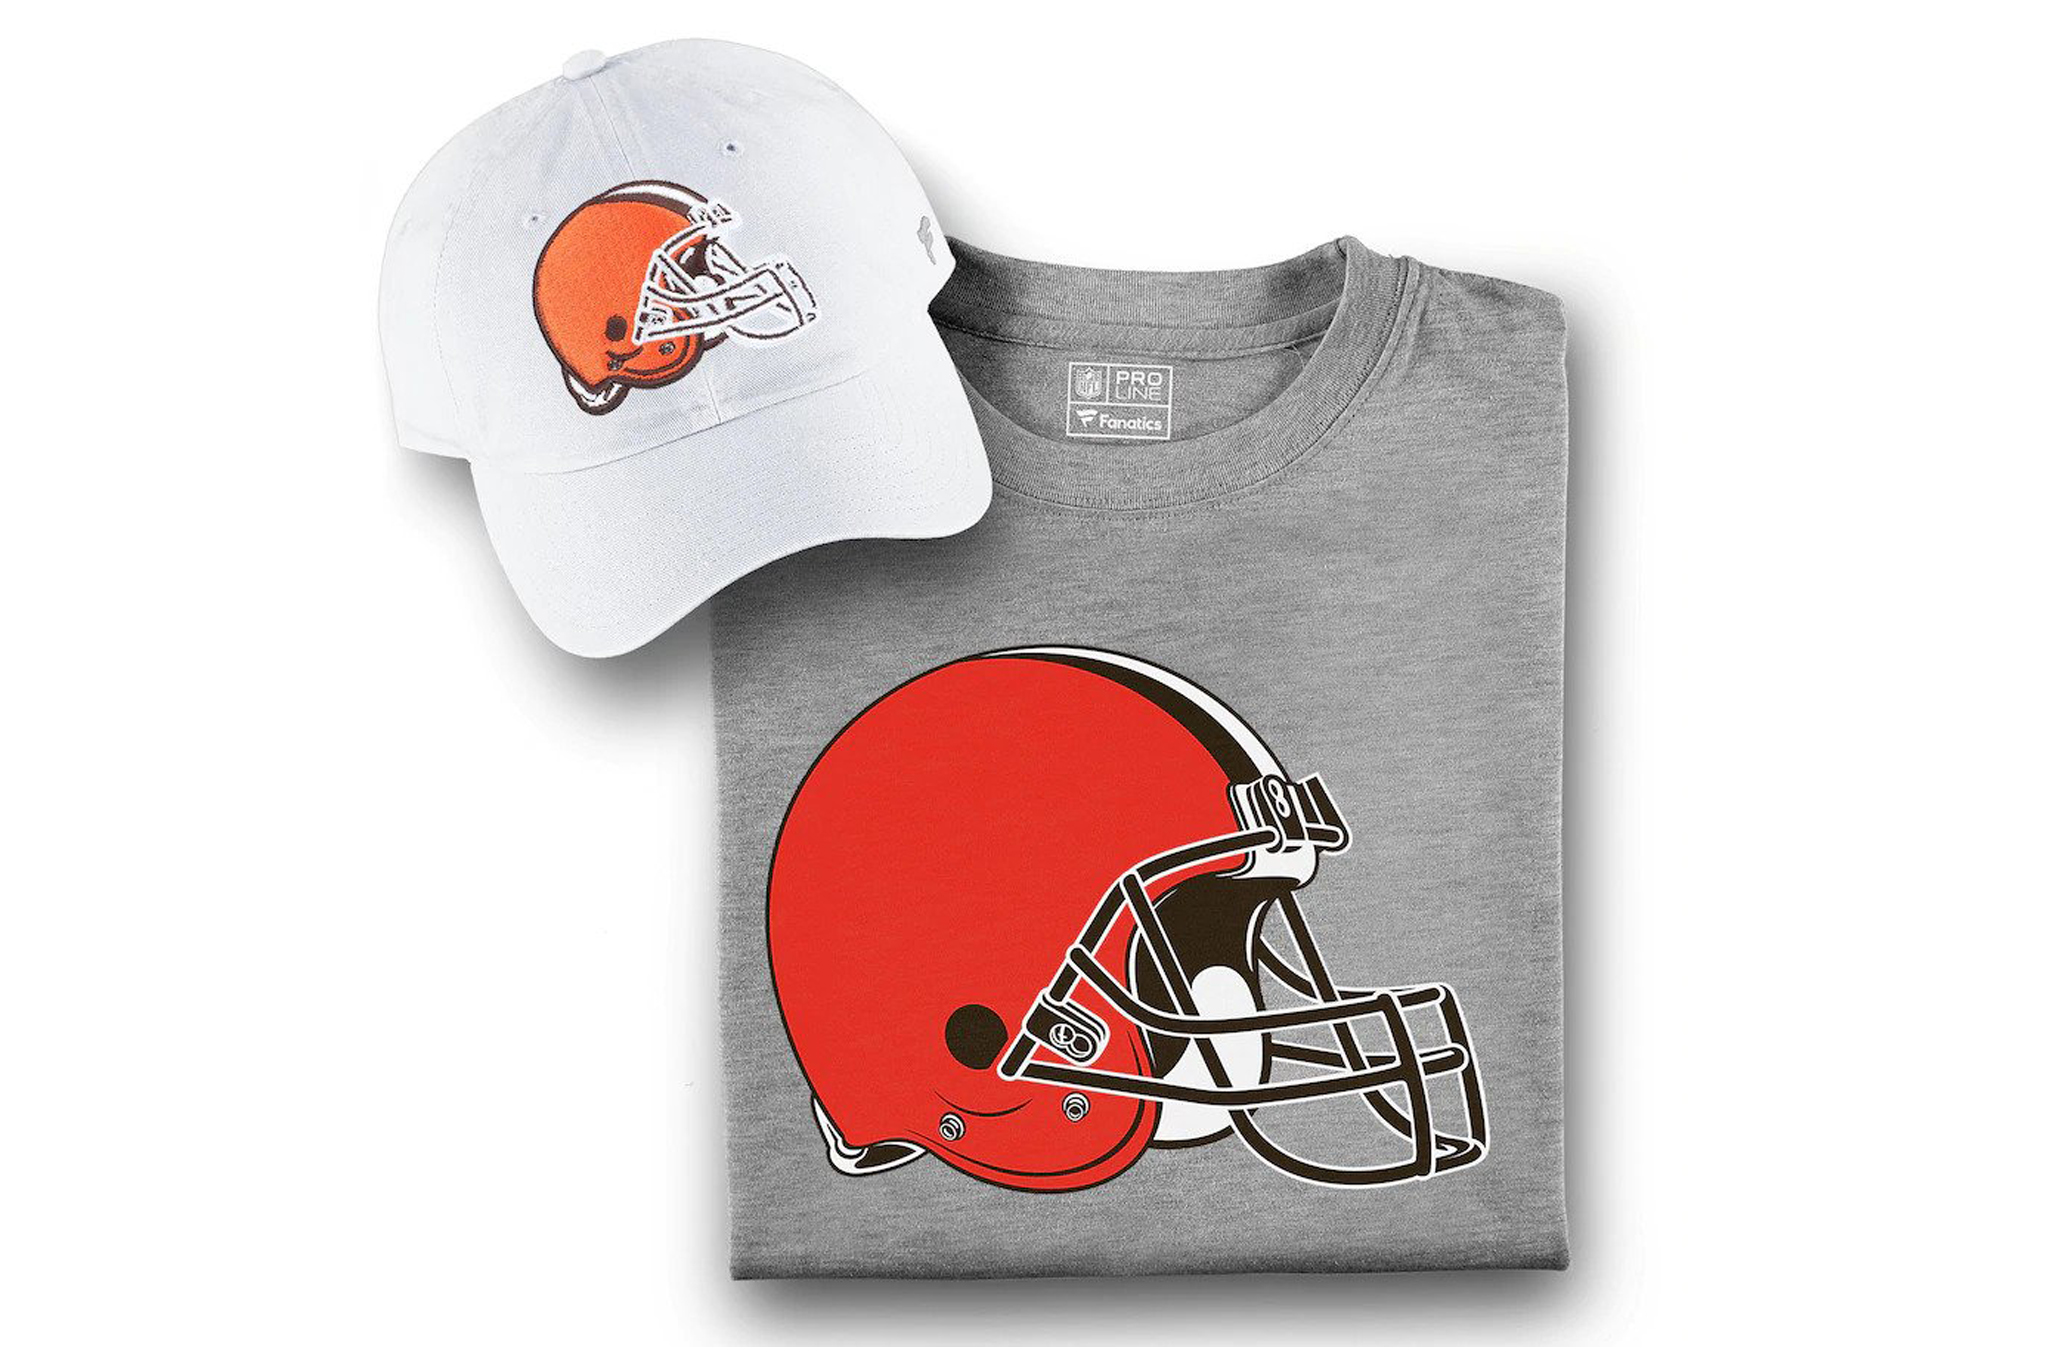 Cleveland Browns gear from last season is gonna be on clearance